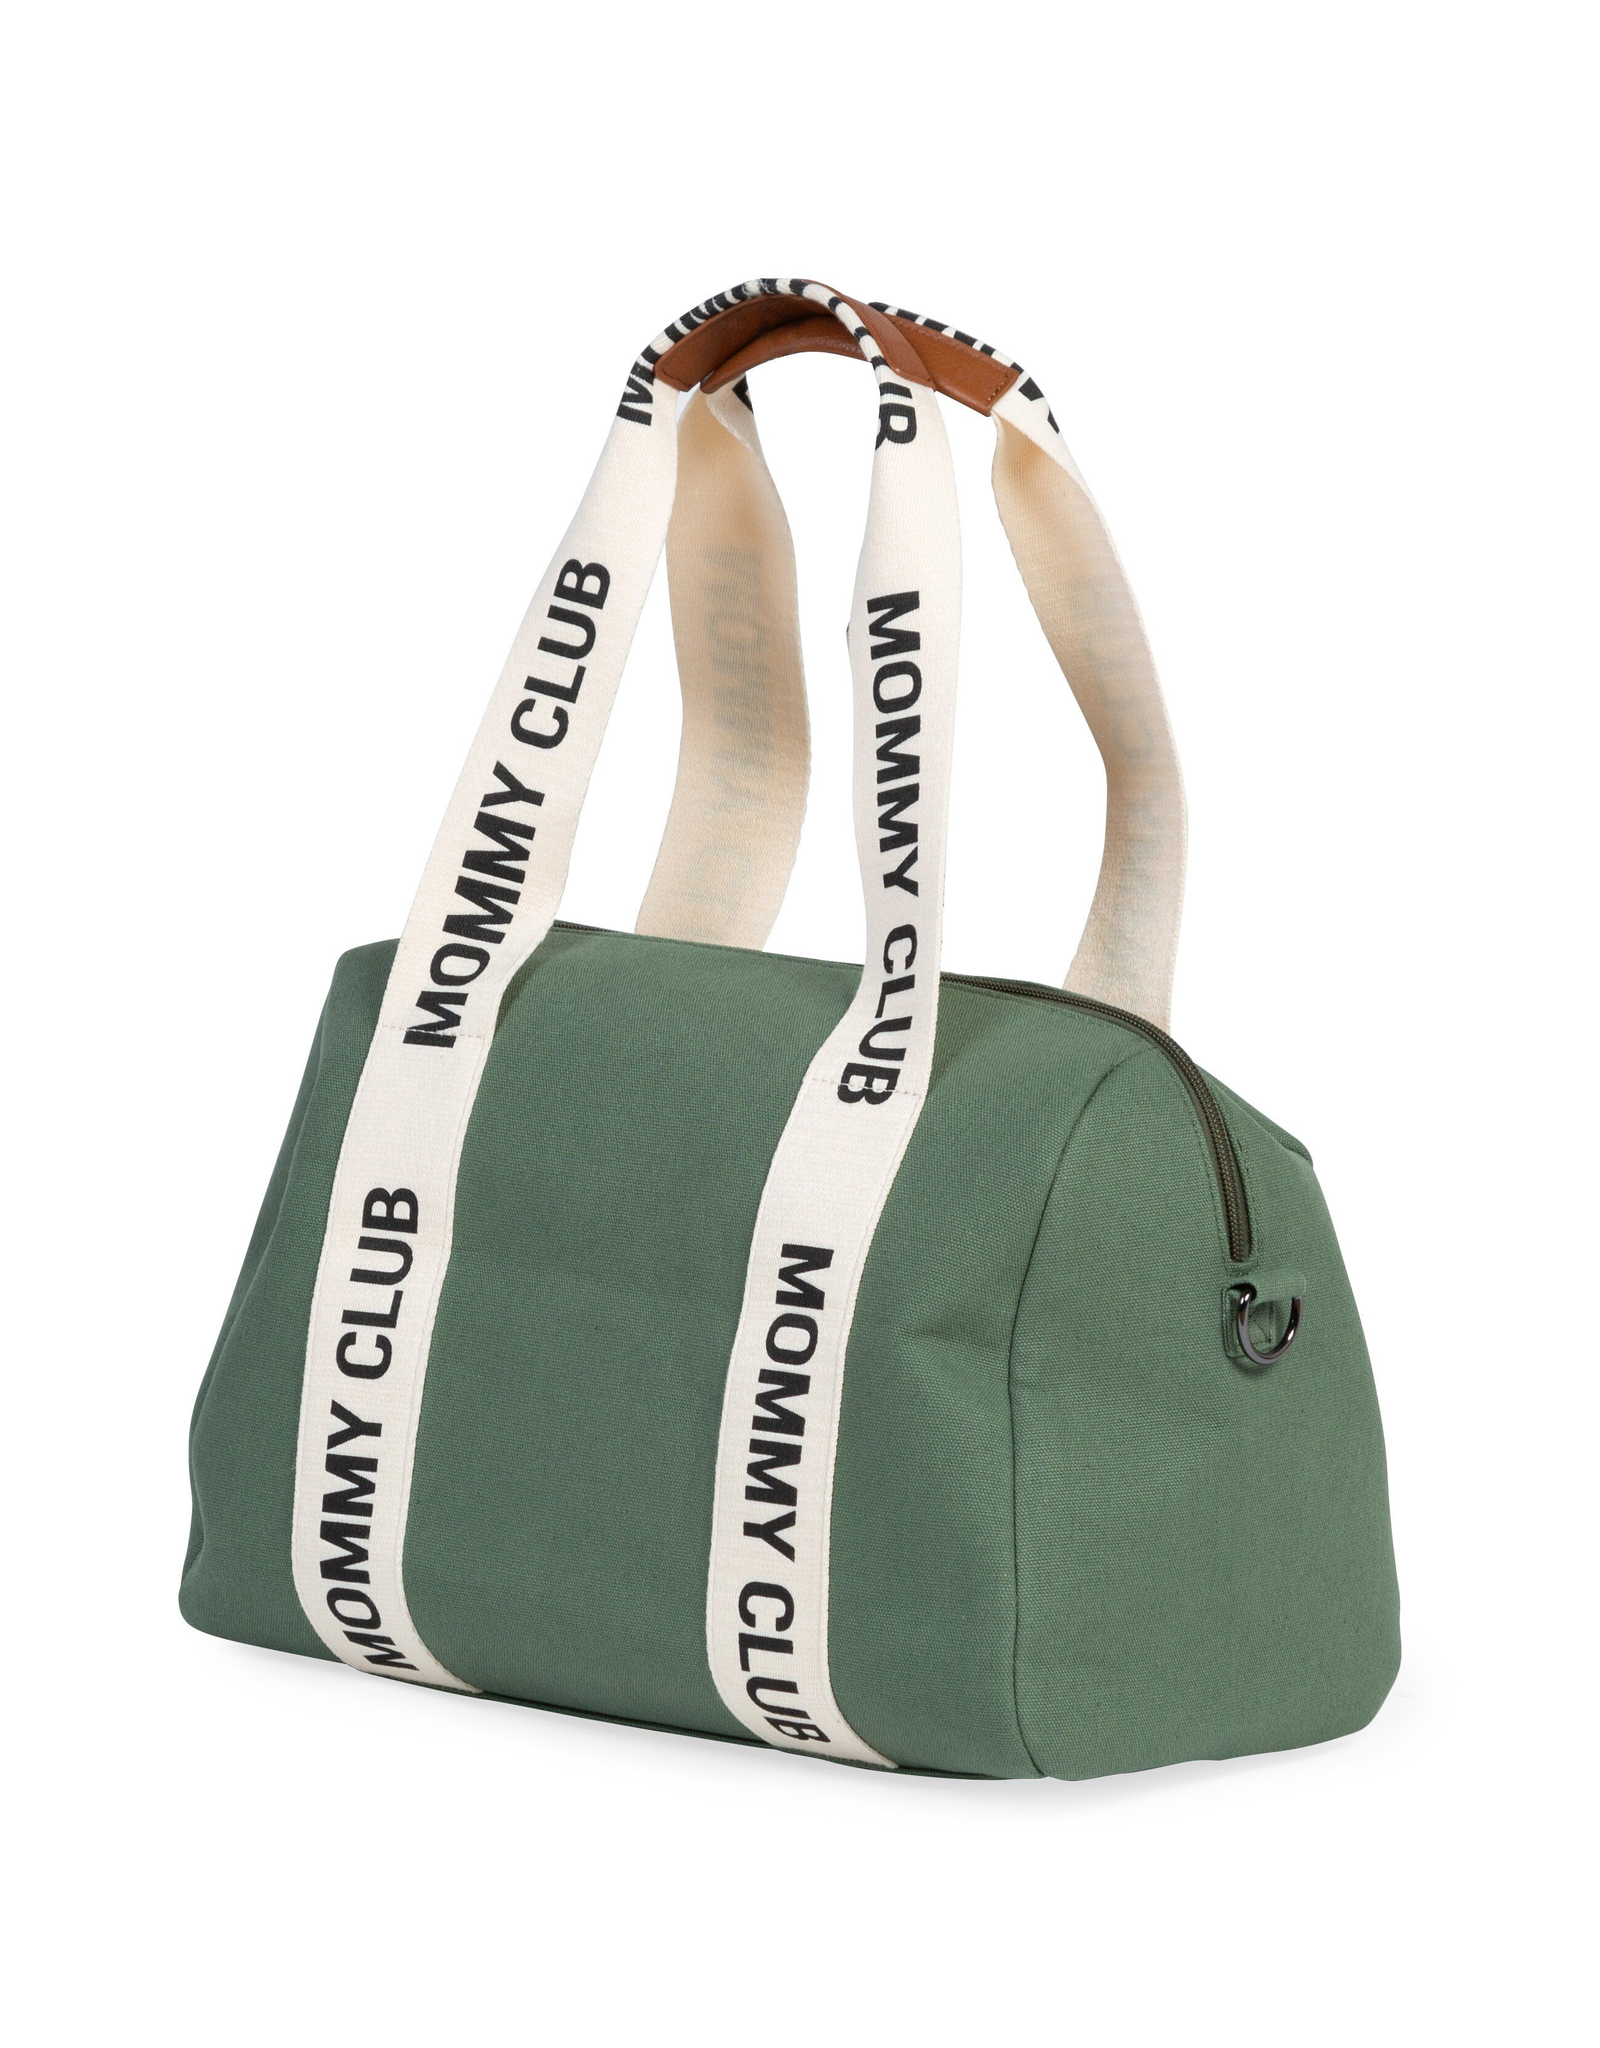 Childhome Mommy Club - Signature - Green